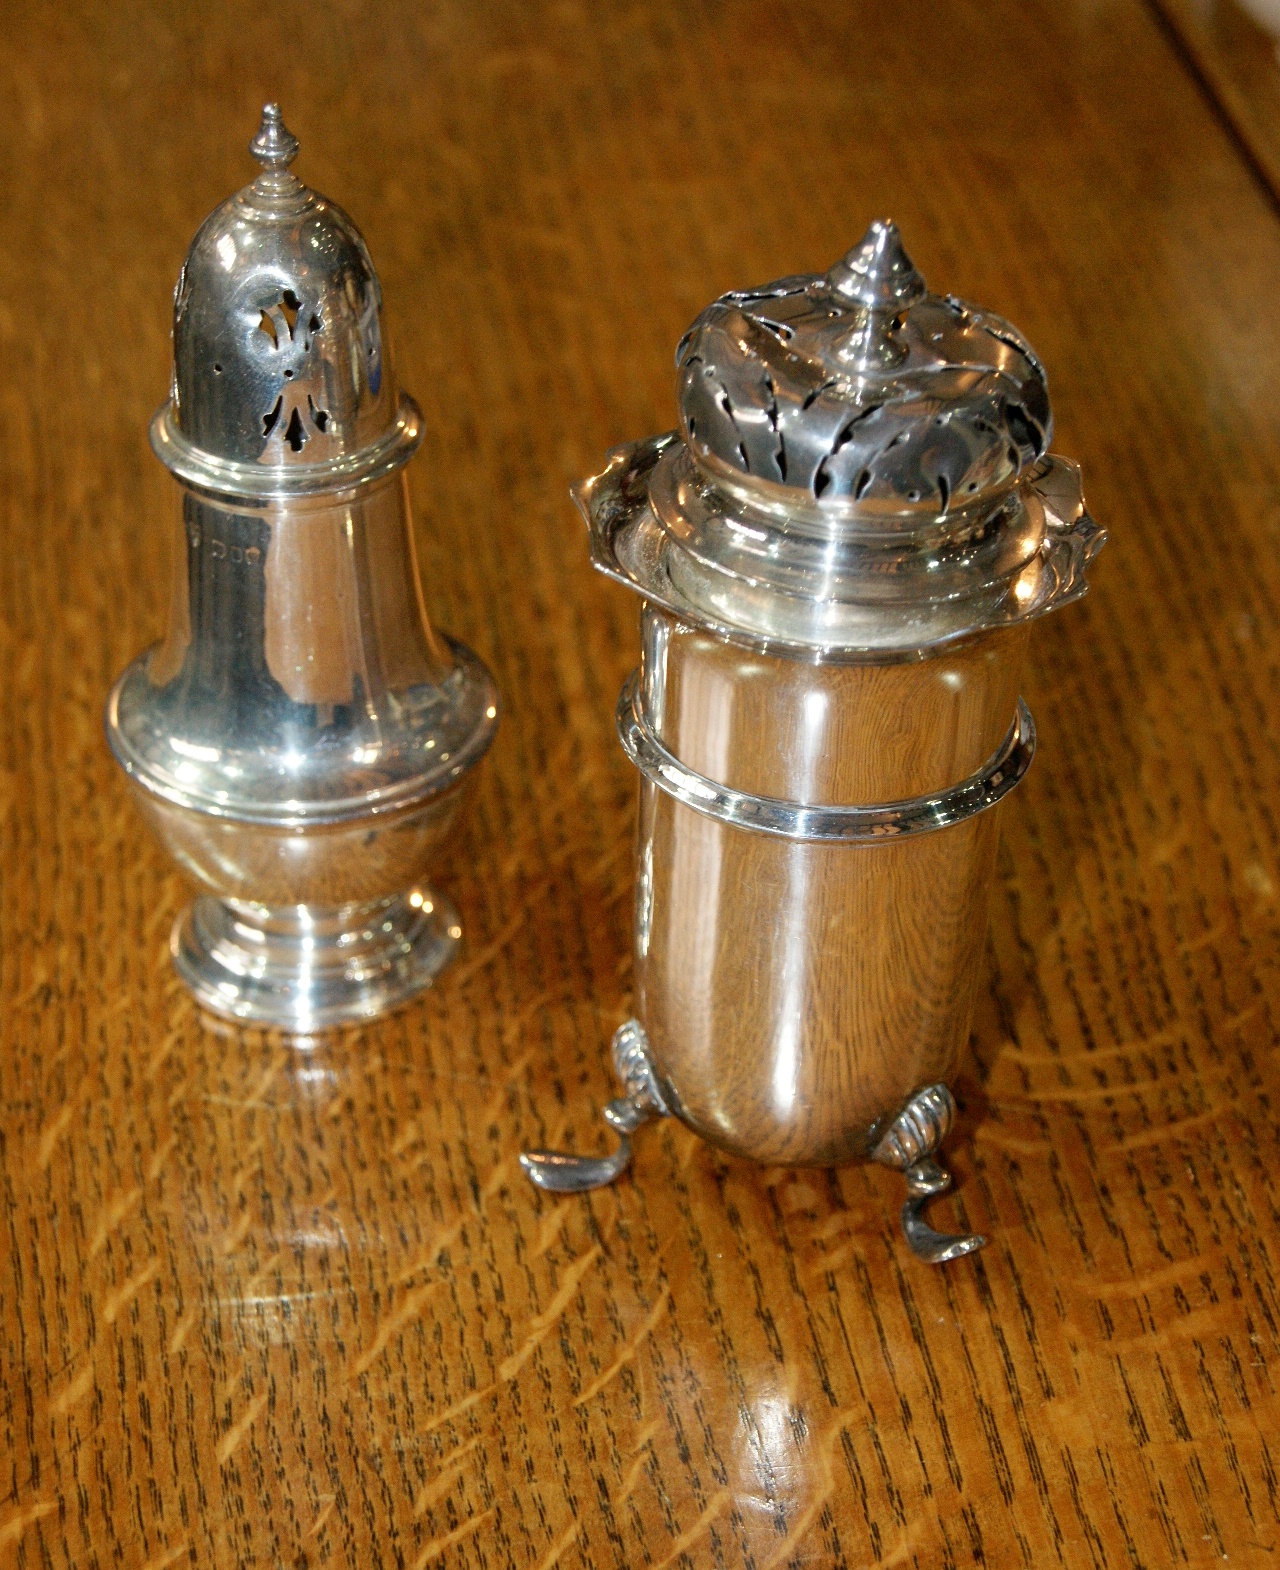 Silver caster of baluster form with urn shaped finial, London 1967, together with a silver caster of